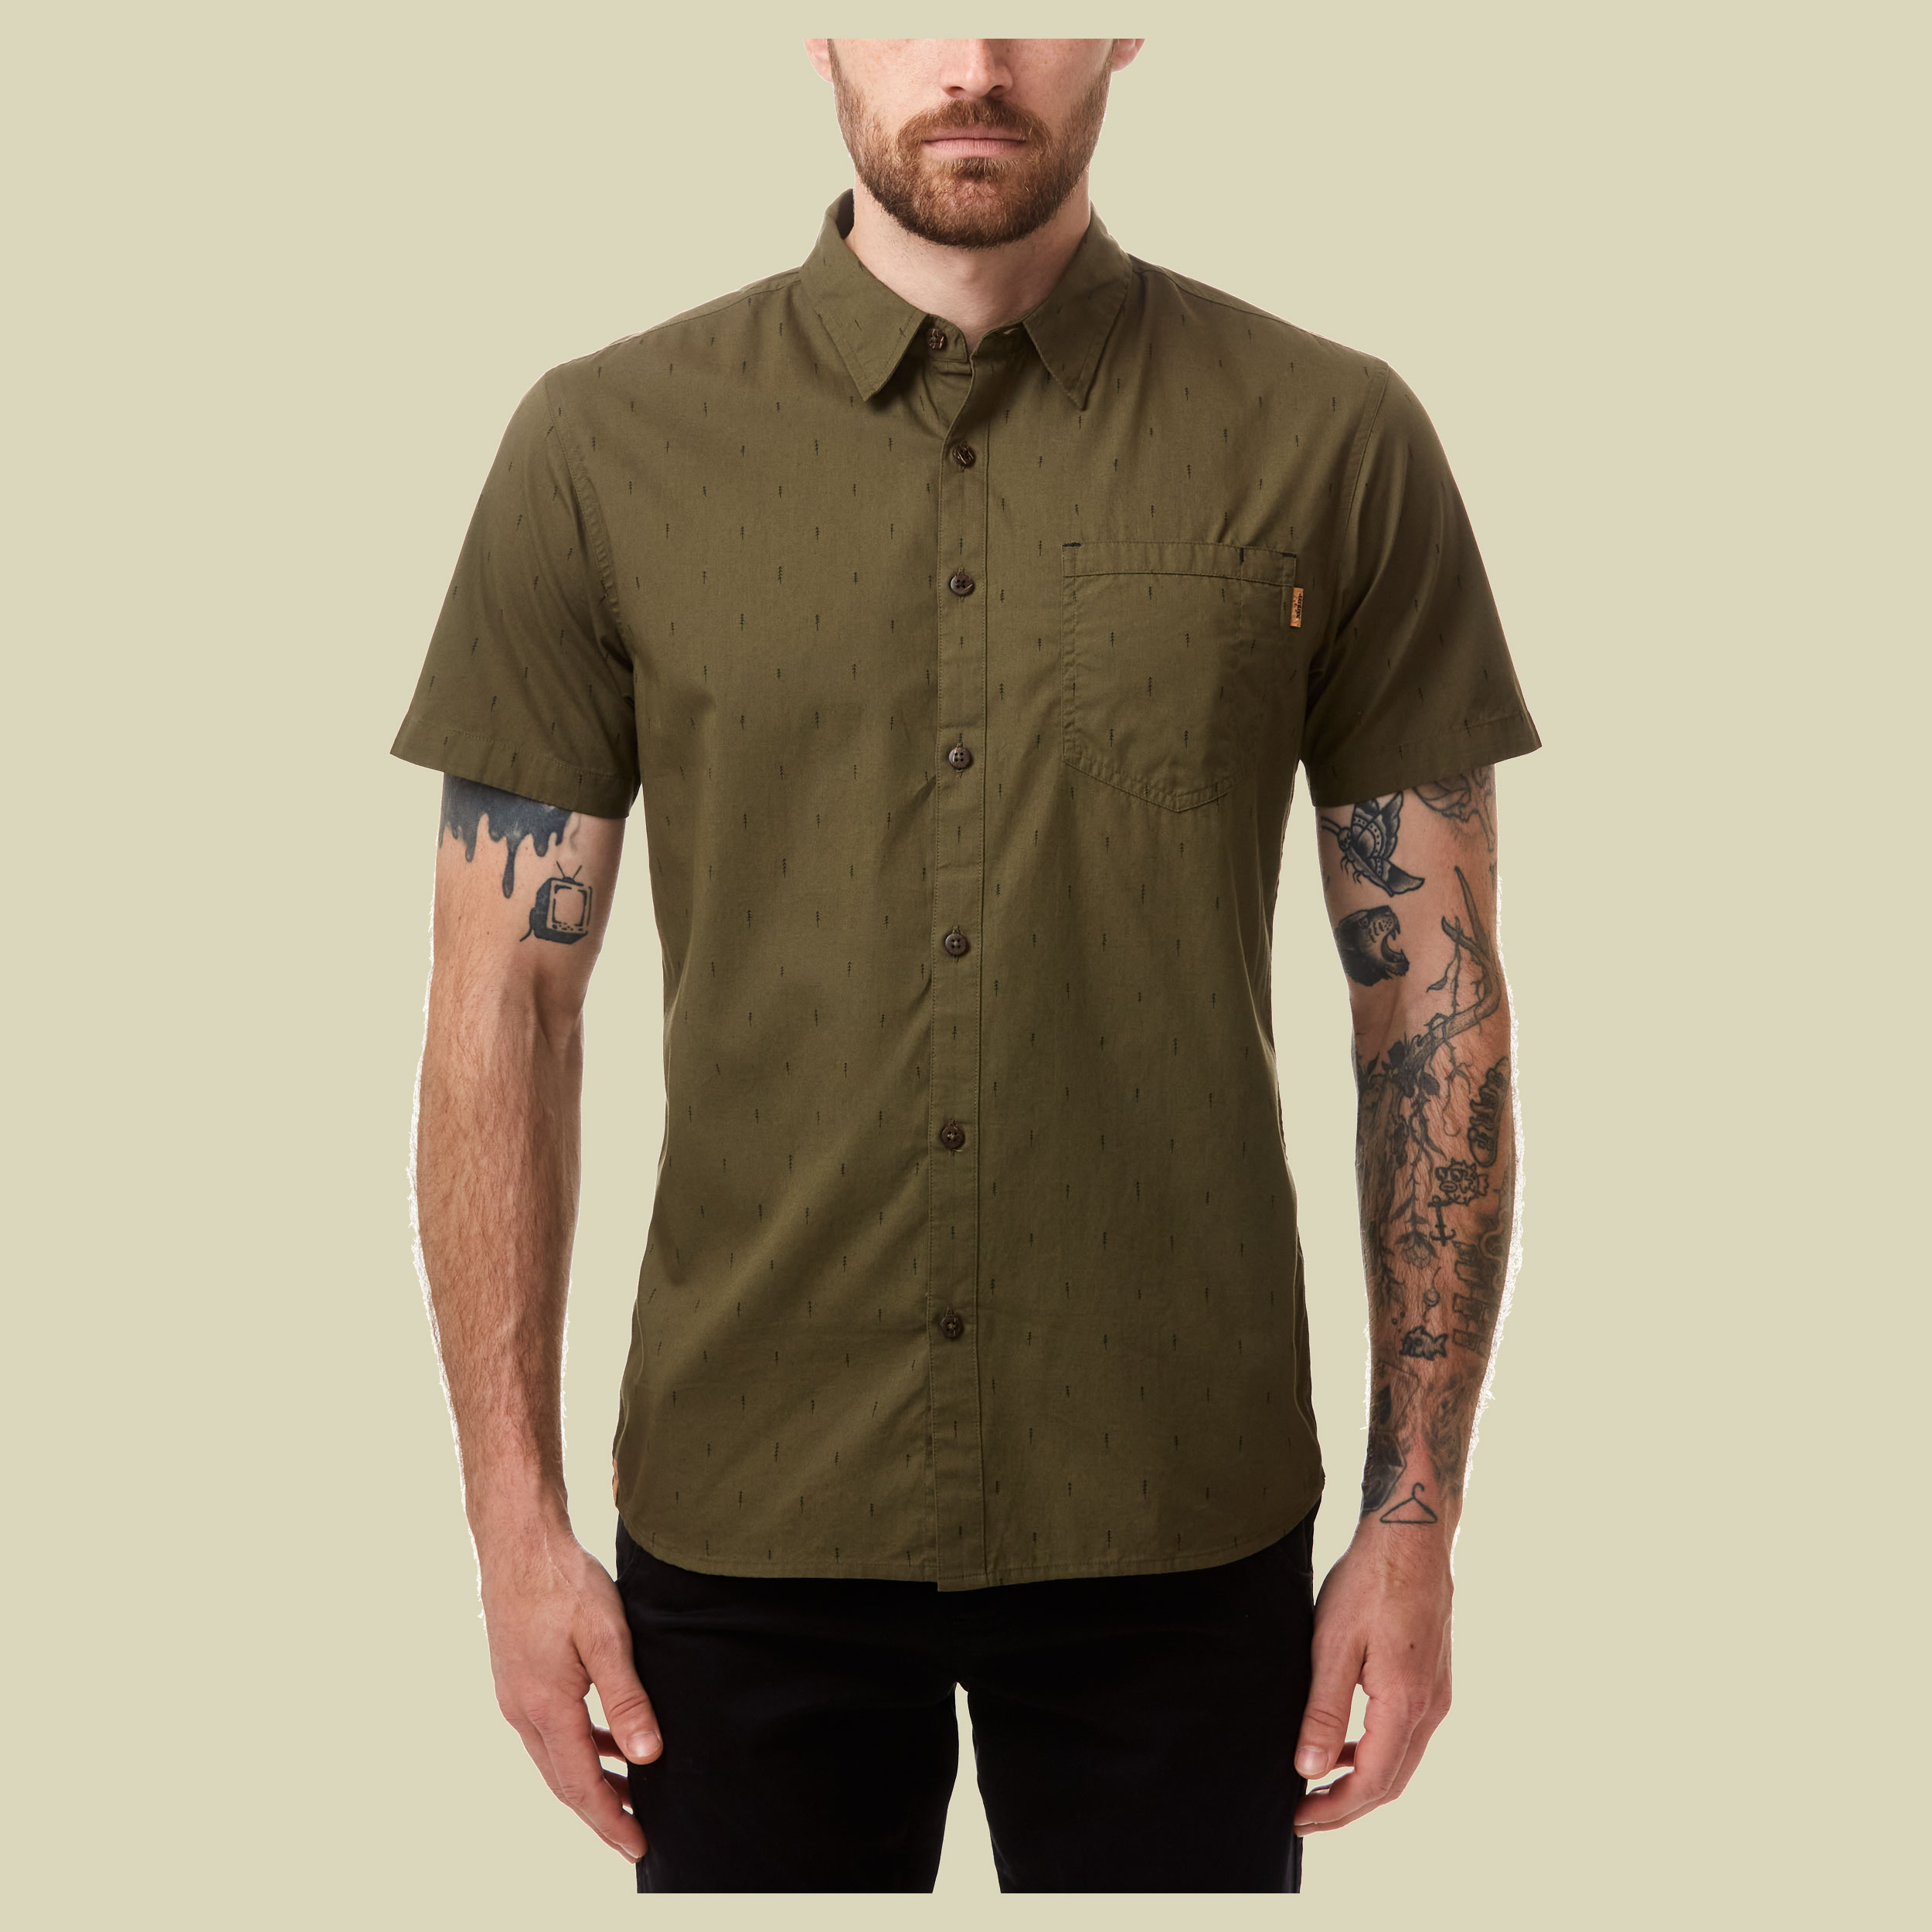 Cotton Short Sleeve Button Up Men Größe XL Farbe olive night small tree